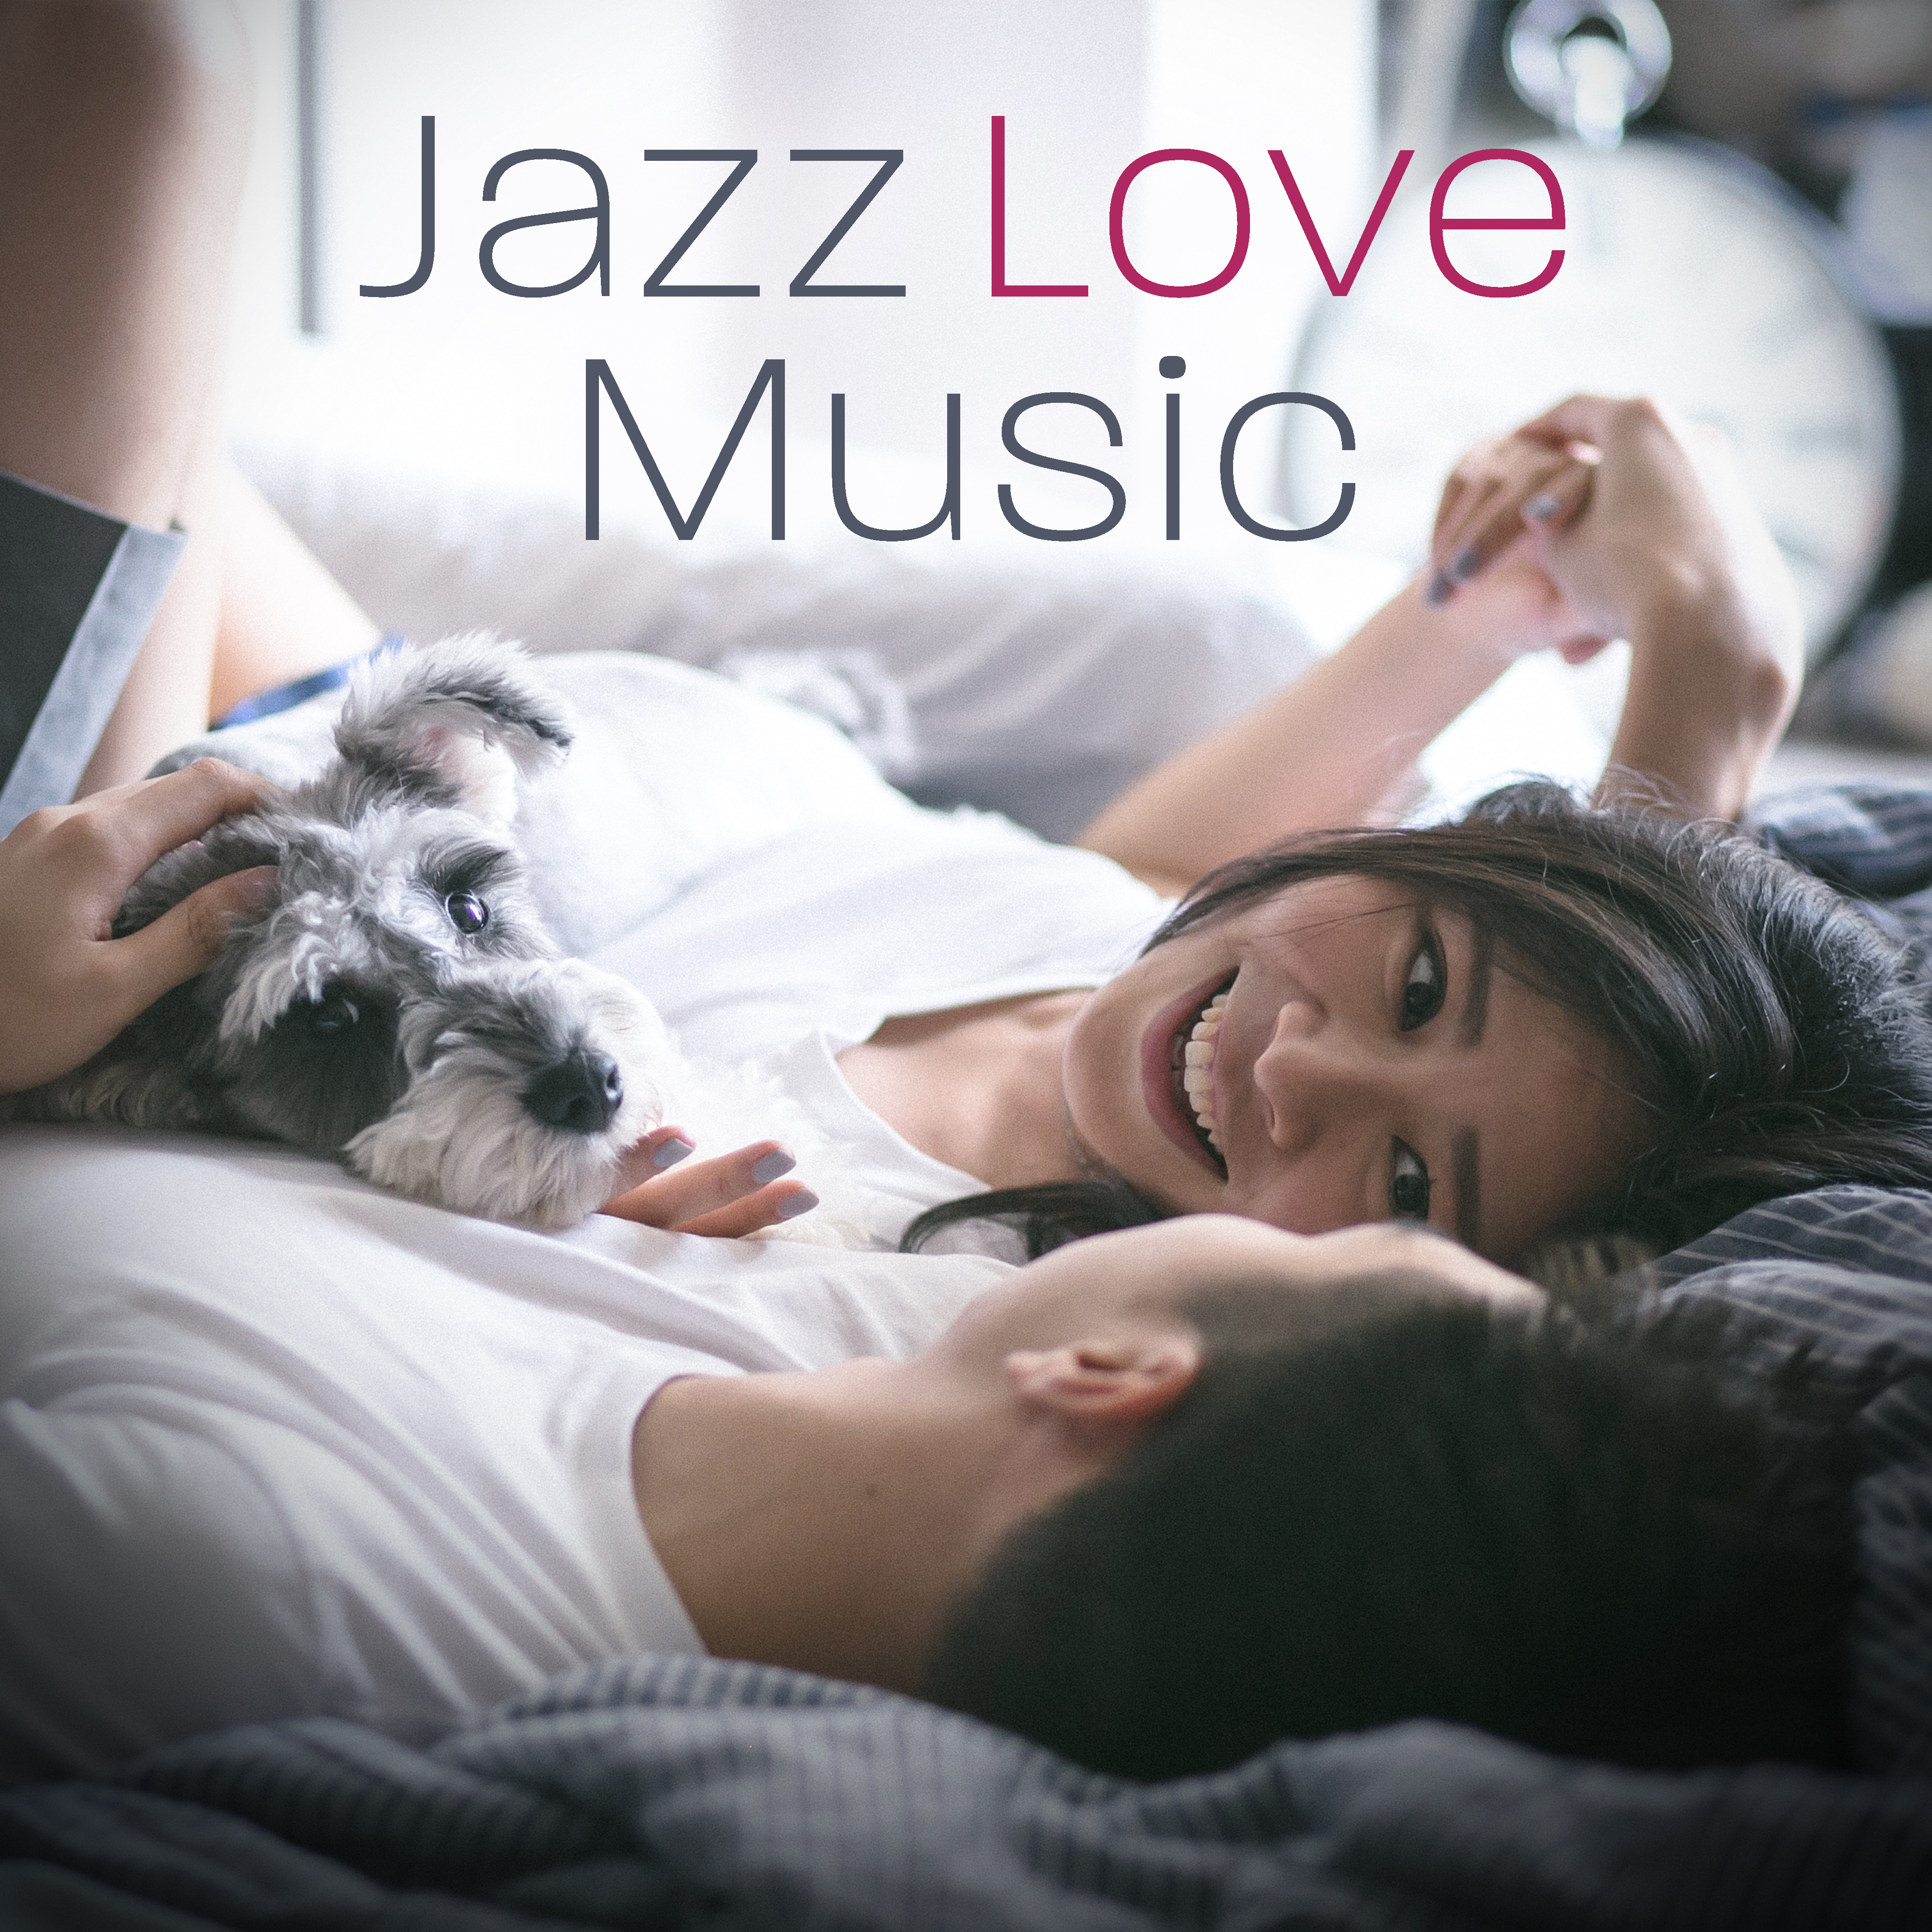 Jazz Love Music  Soft Jazz for Candlelight Dinner, Peaceful Sounds, Jazz Music for  Massage, Romantic Evening with Lovers